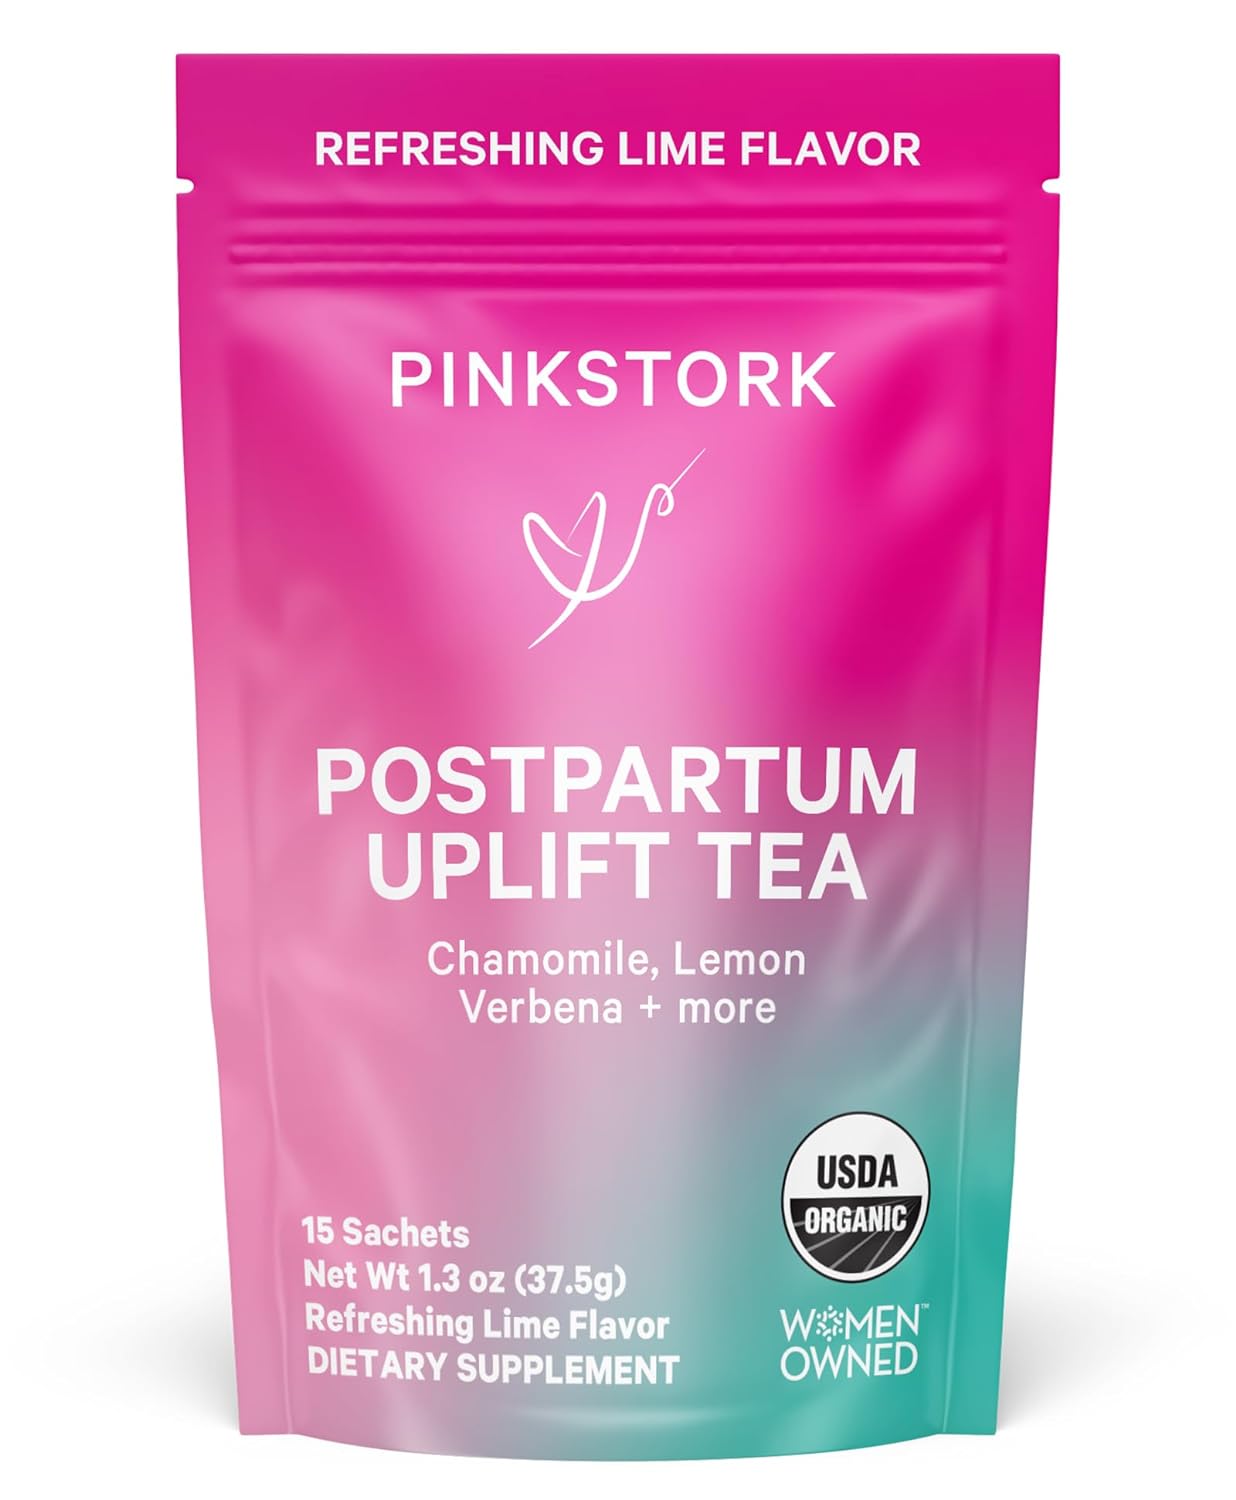 Pink Stork Postpartum Uplift Mood Support Tea: Hormone Balance for Women After Pregnancy, Chamomile Tea with Red Raspberry Leaf for Postpartum Recovery - Caffeine-Free, 15 Sachets